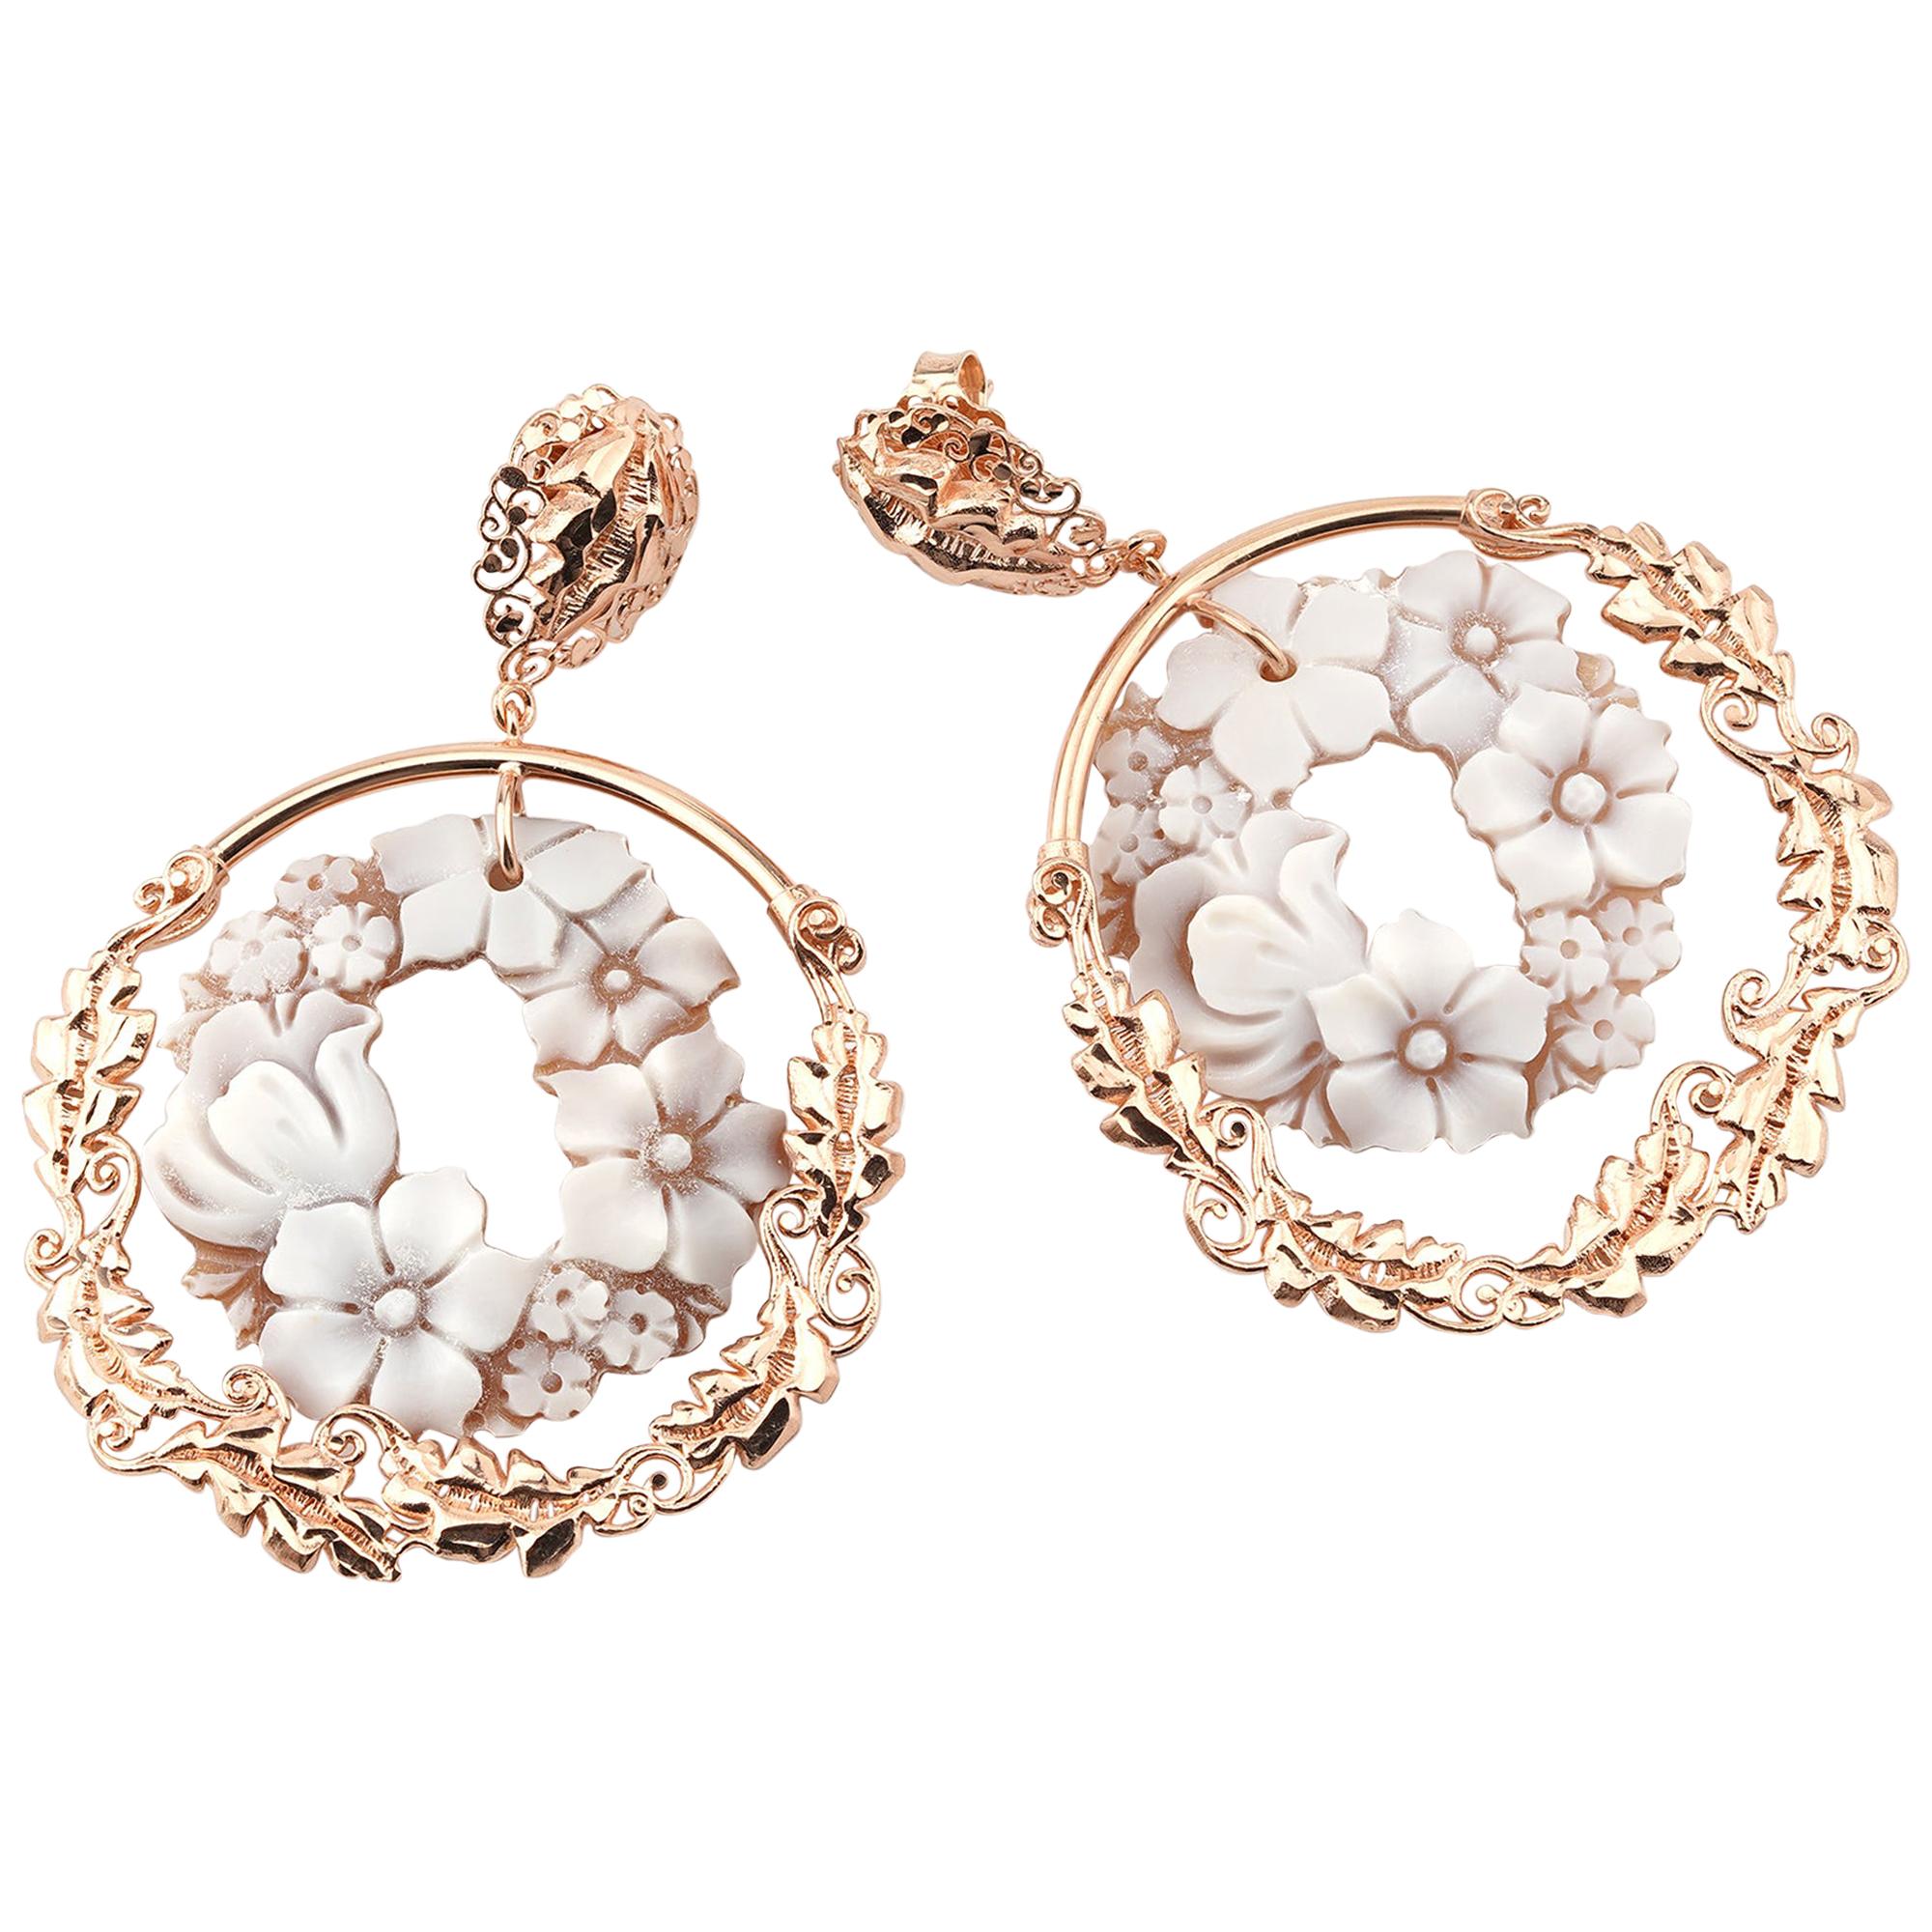 18 Carat Rose Gold-Plated 925 Sterling Silver Sea Shell Cameo Earrings For Sale